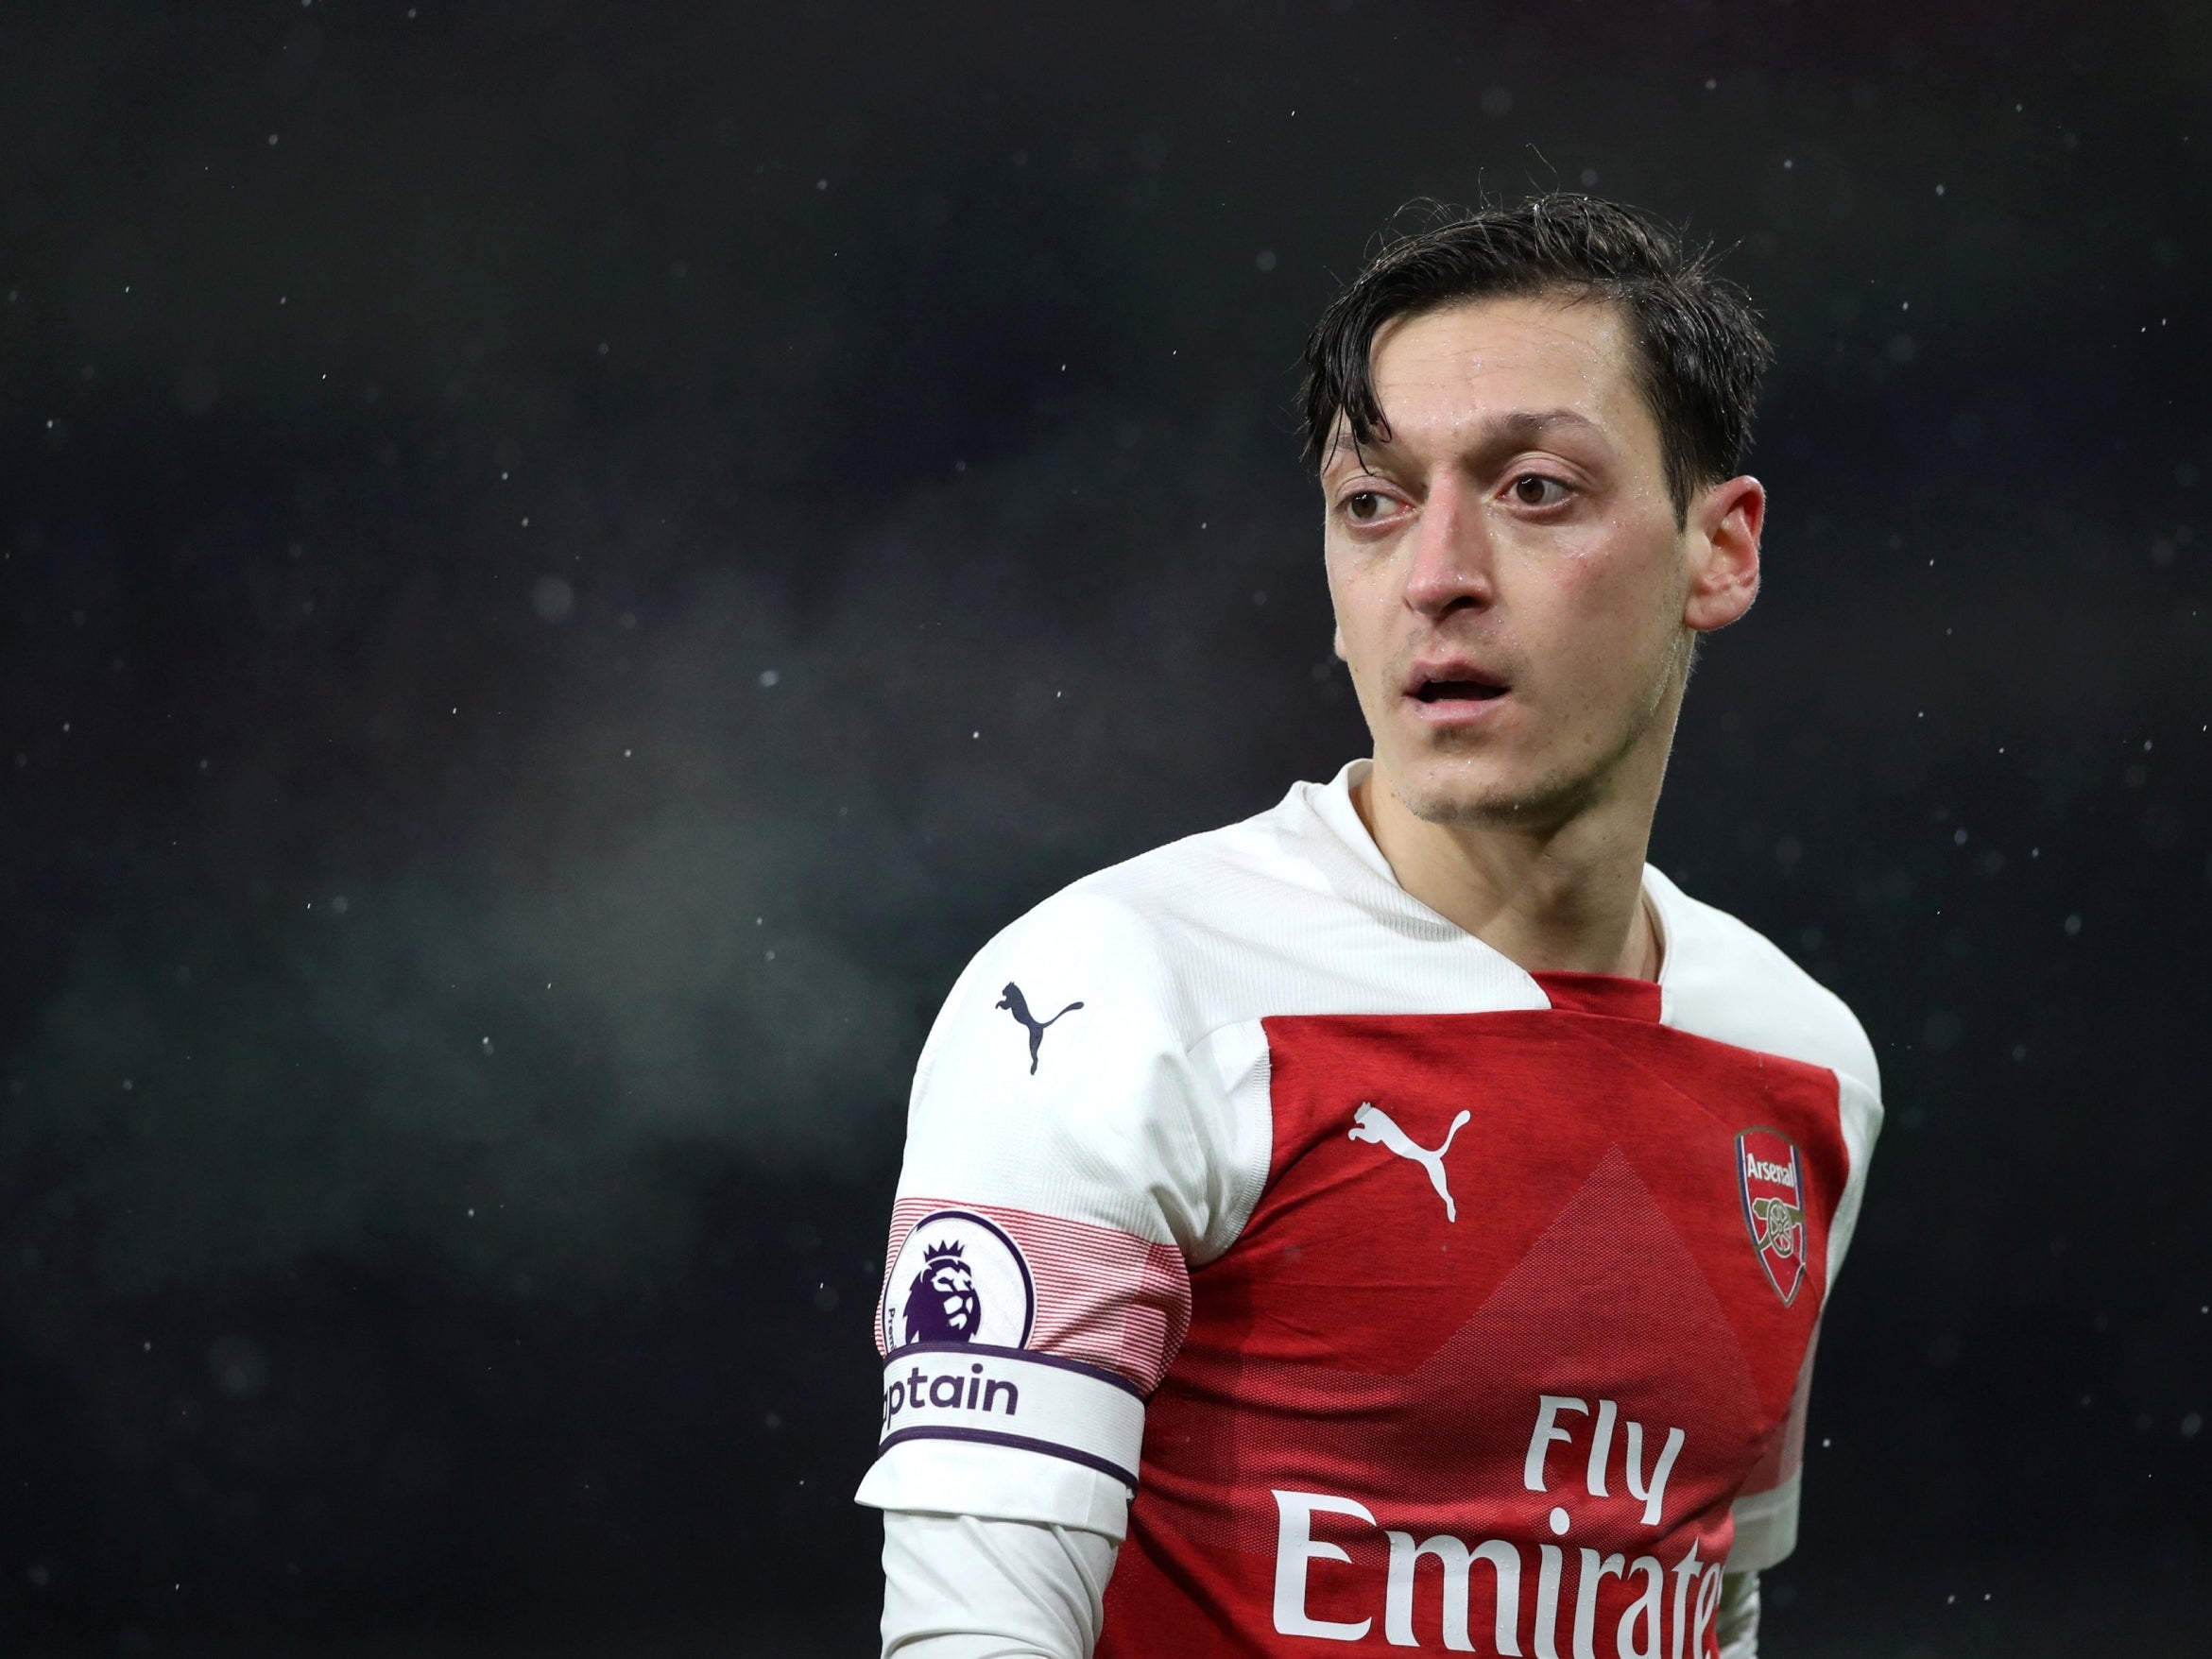 Mesut Ozil has lost his place in Emery's line-up